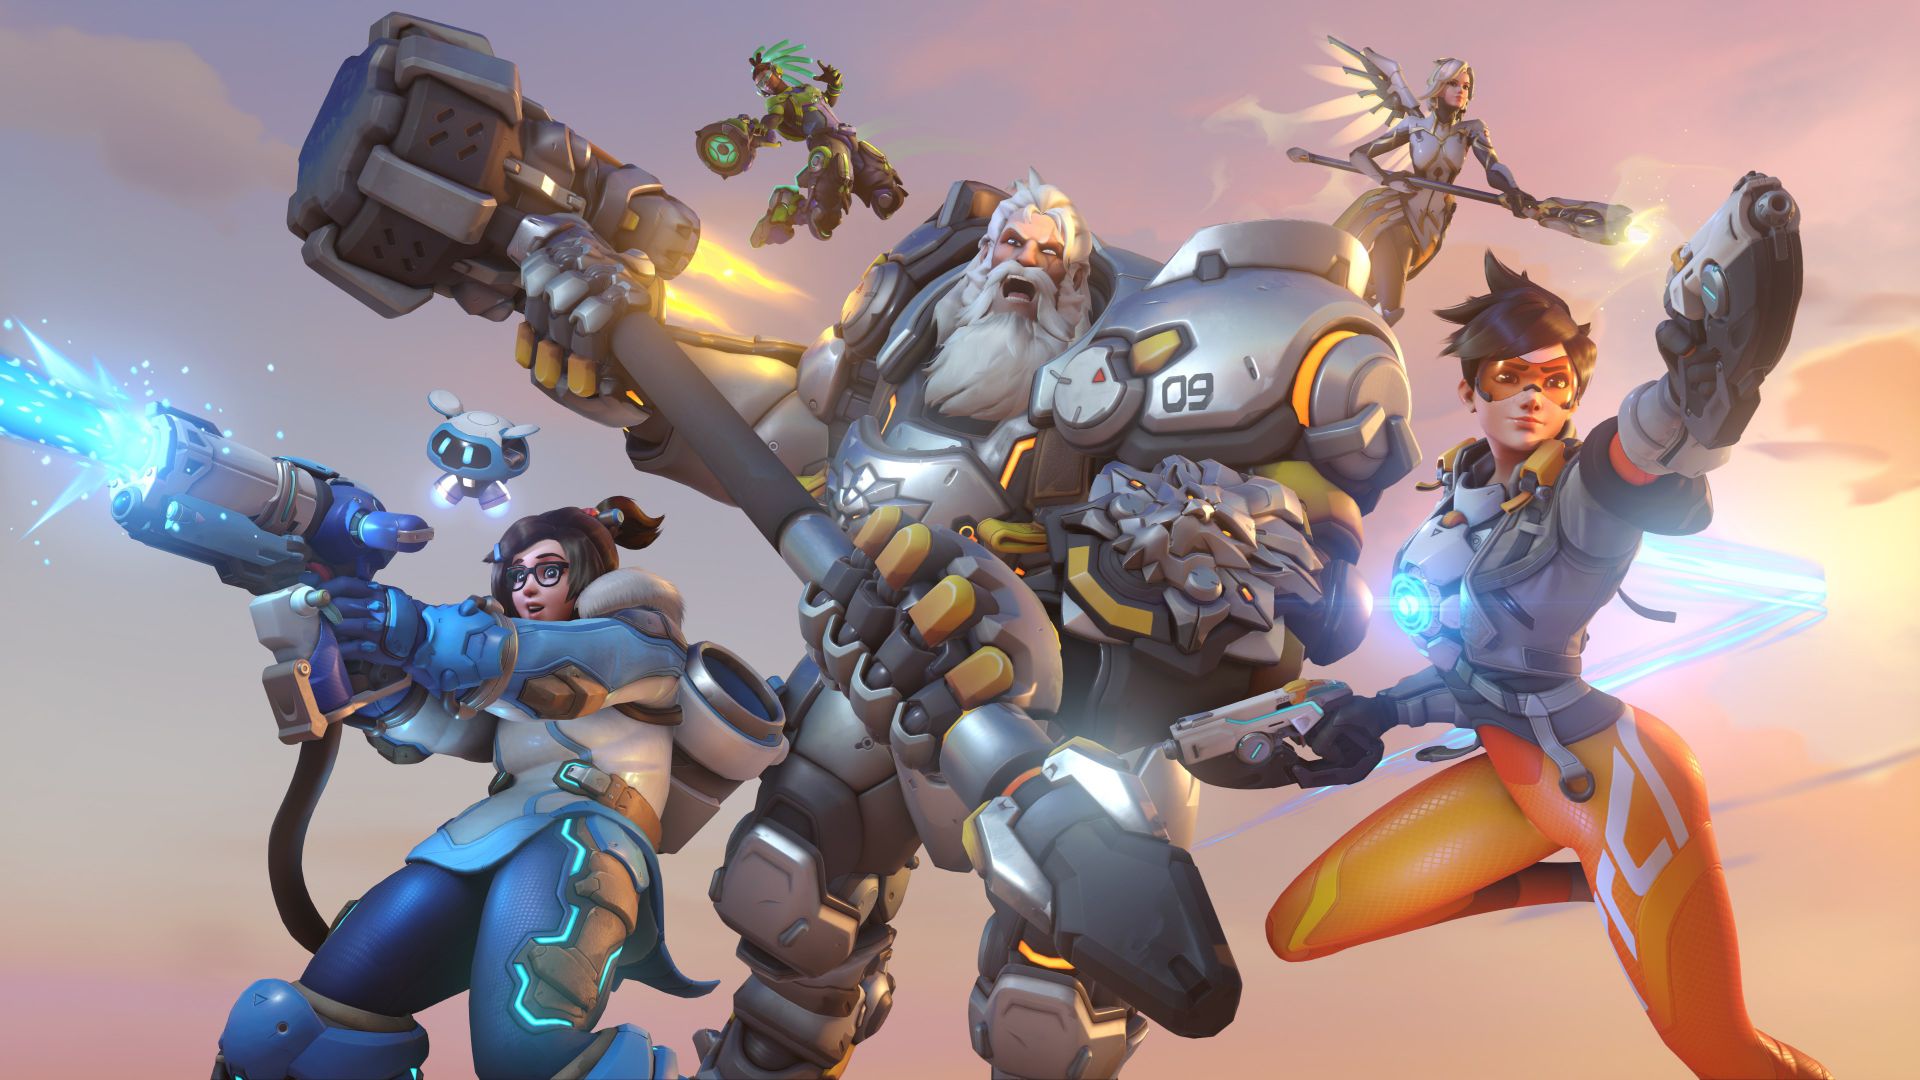 Bastion and Torbjörn are temporarily removed from Overwatch 2 due to some bugs that broke the game